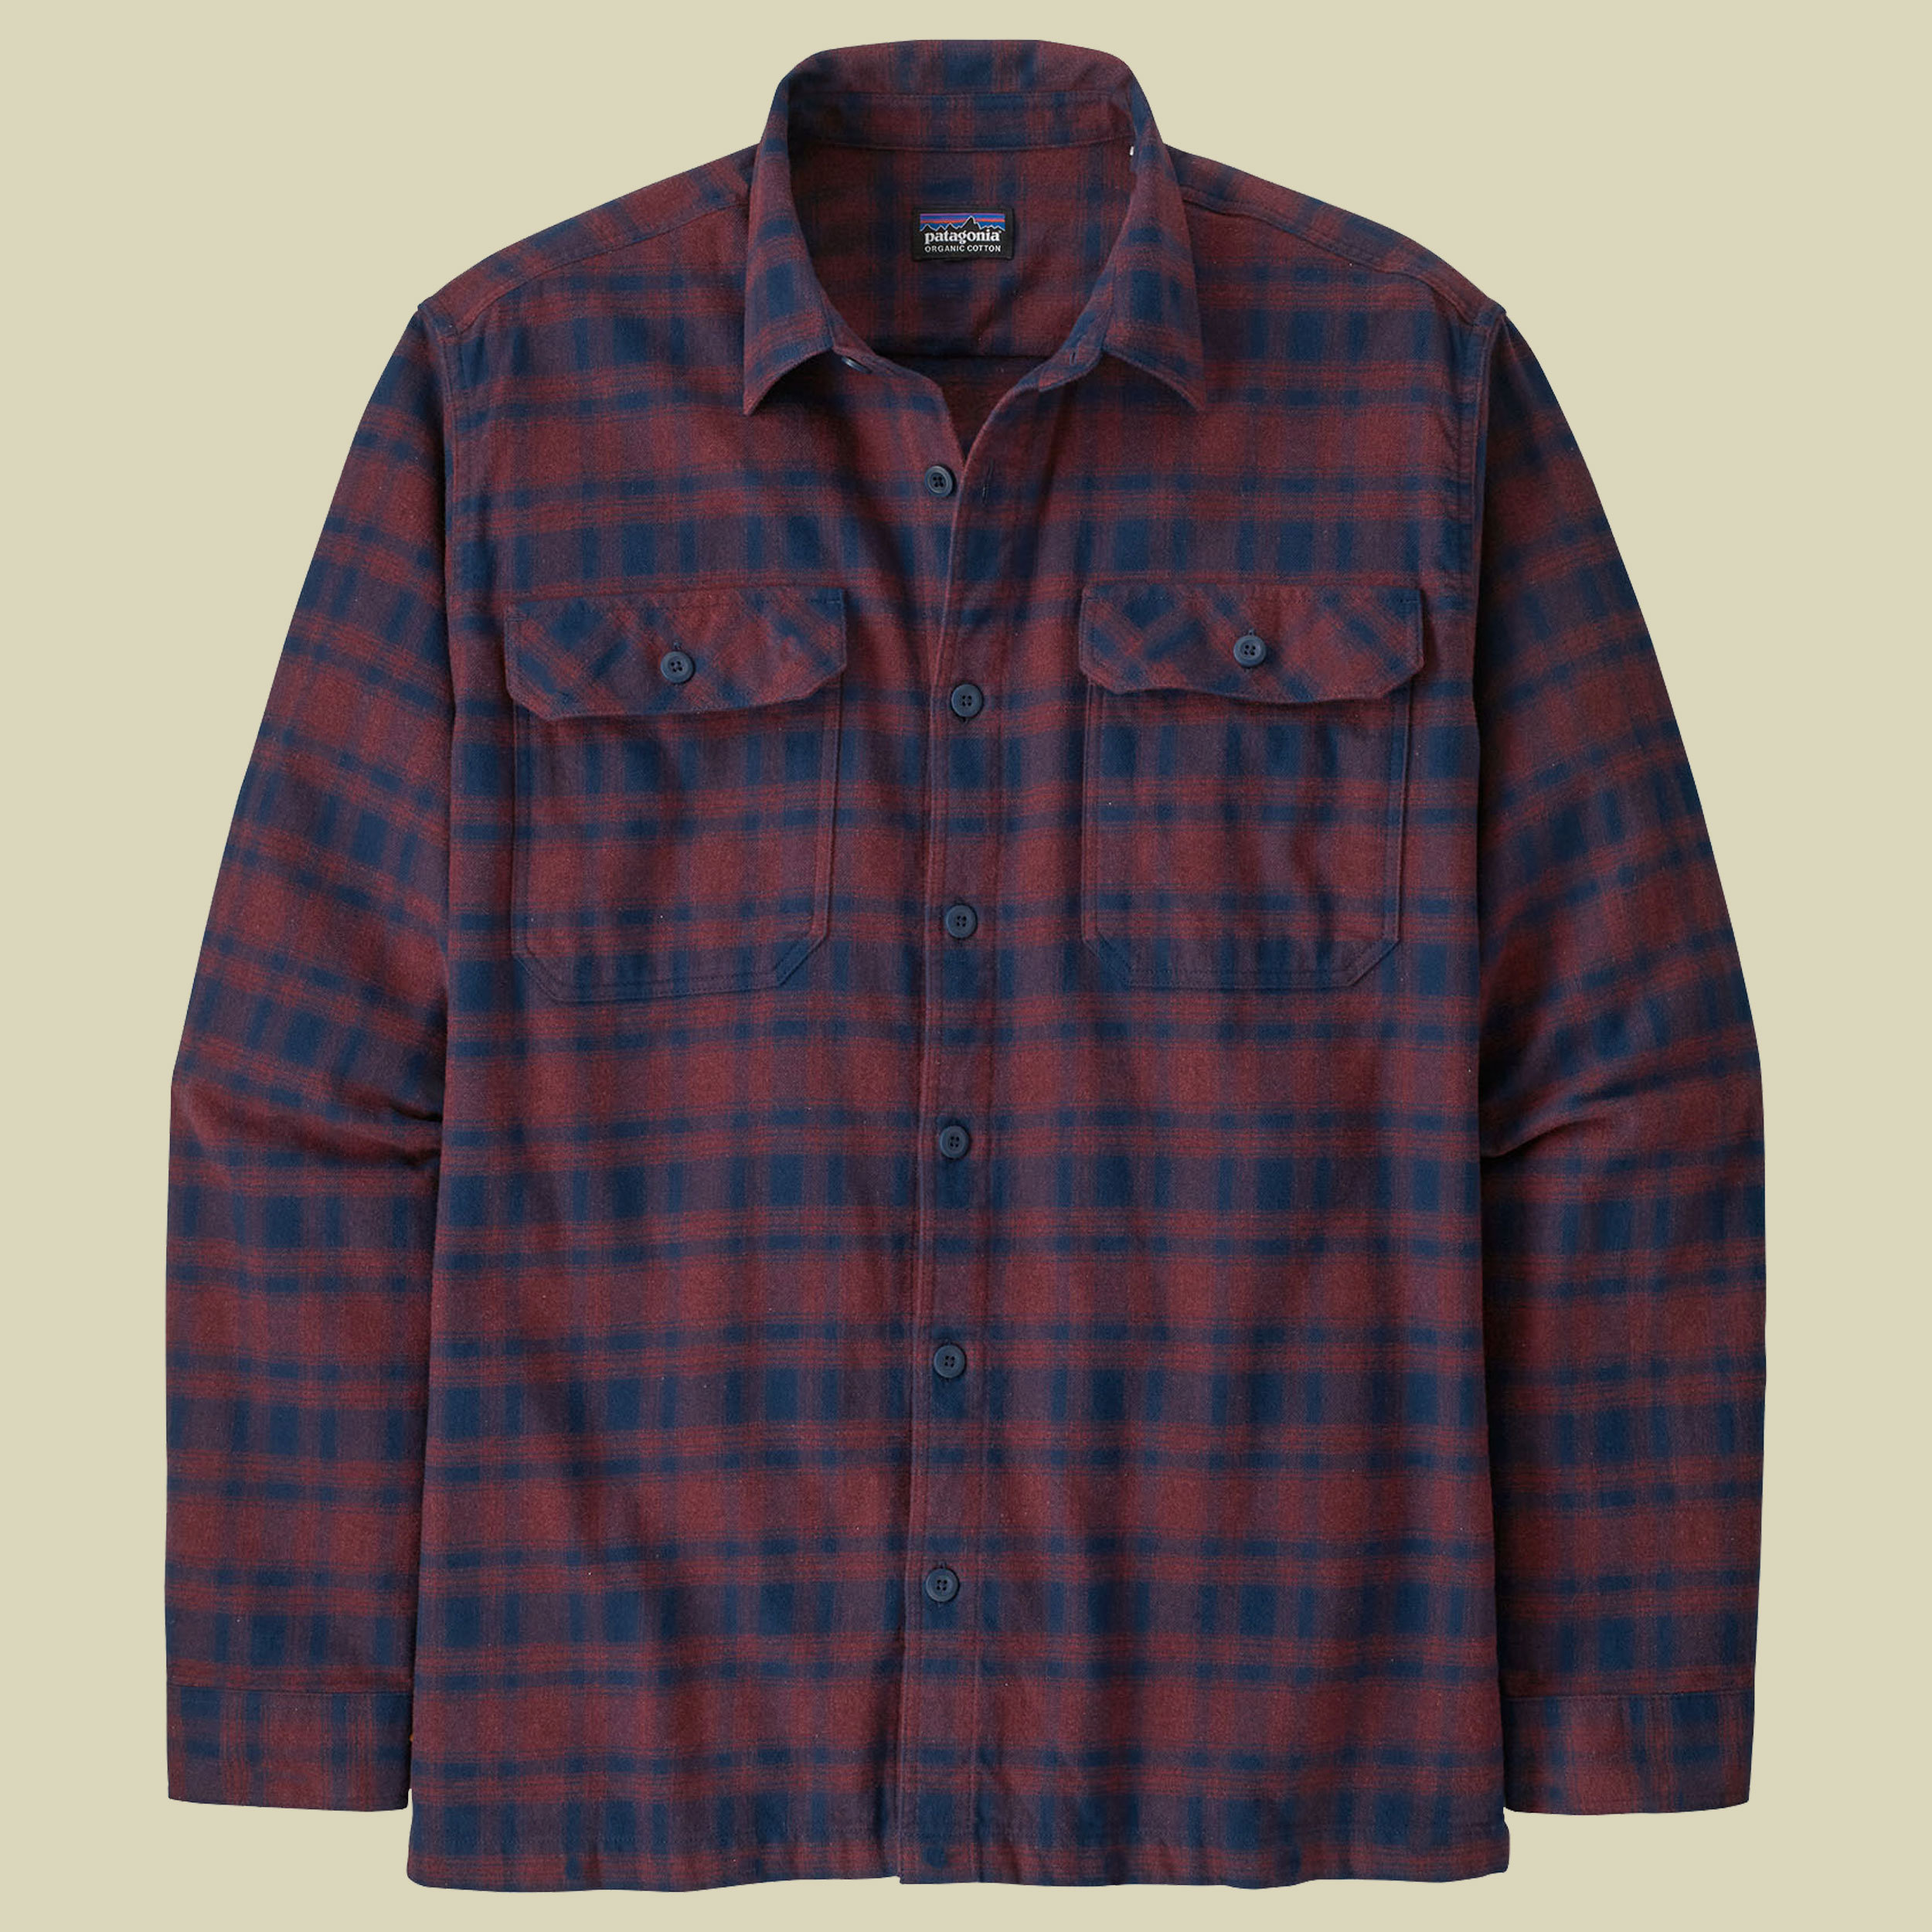 L/S Organic Cotton MW Fjord Flannel Shirt Men Größe XL Farbe Connected Lines: sequoia red